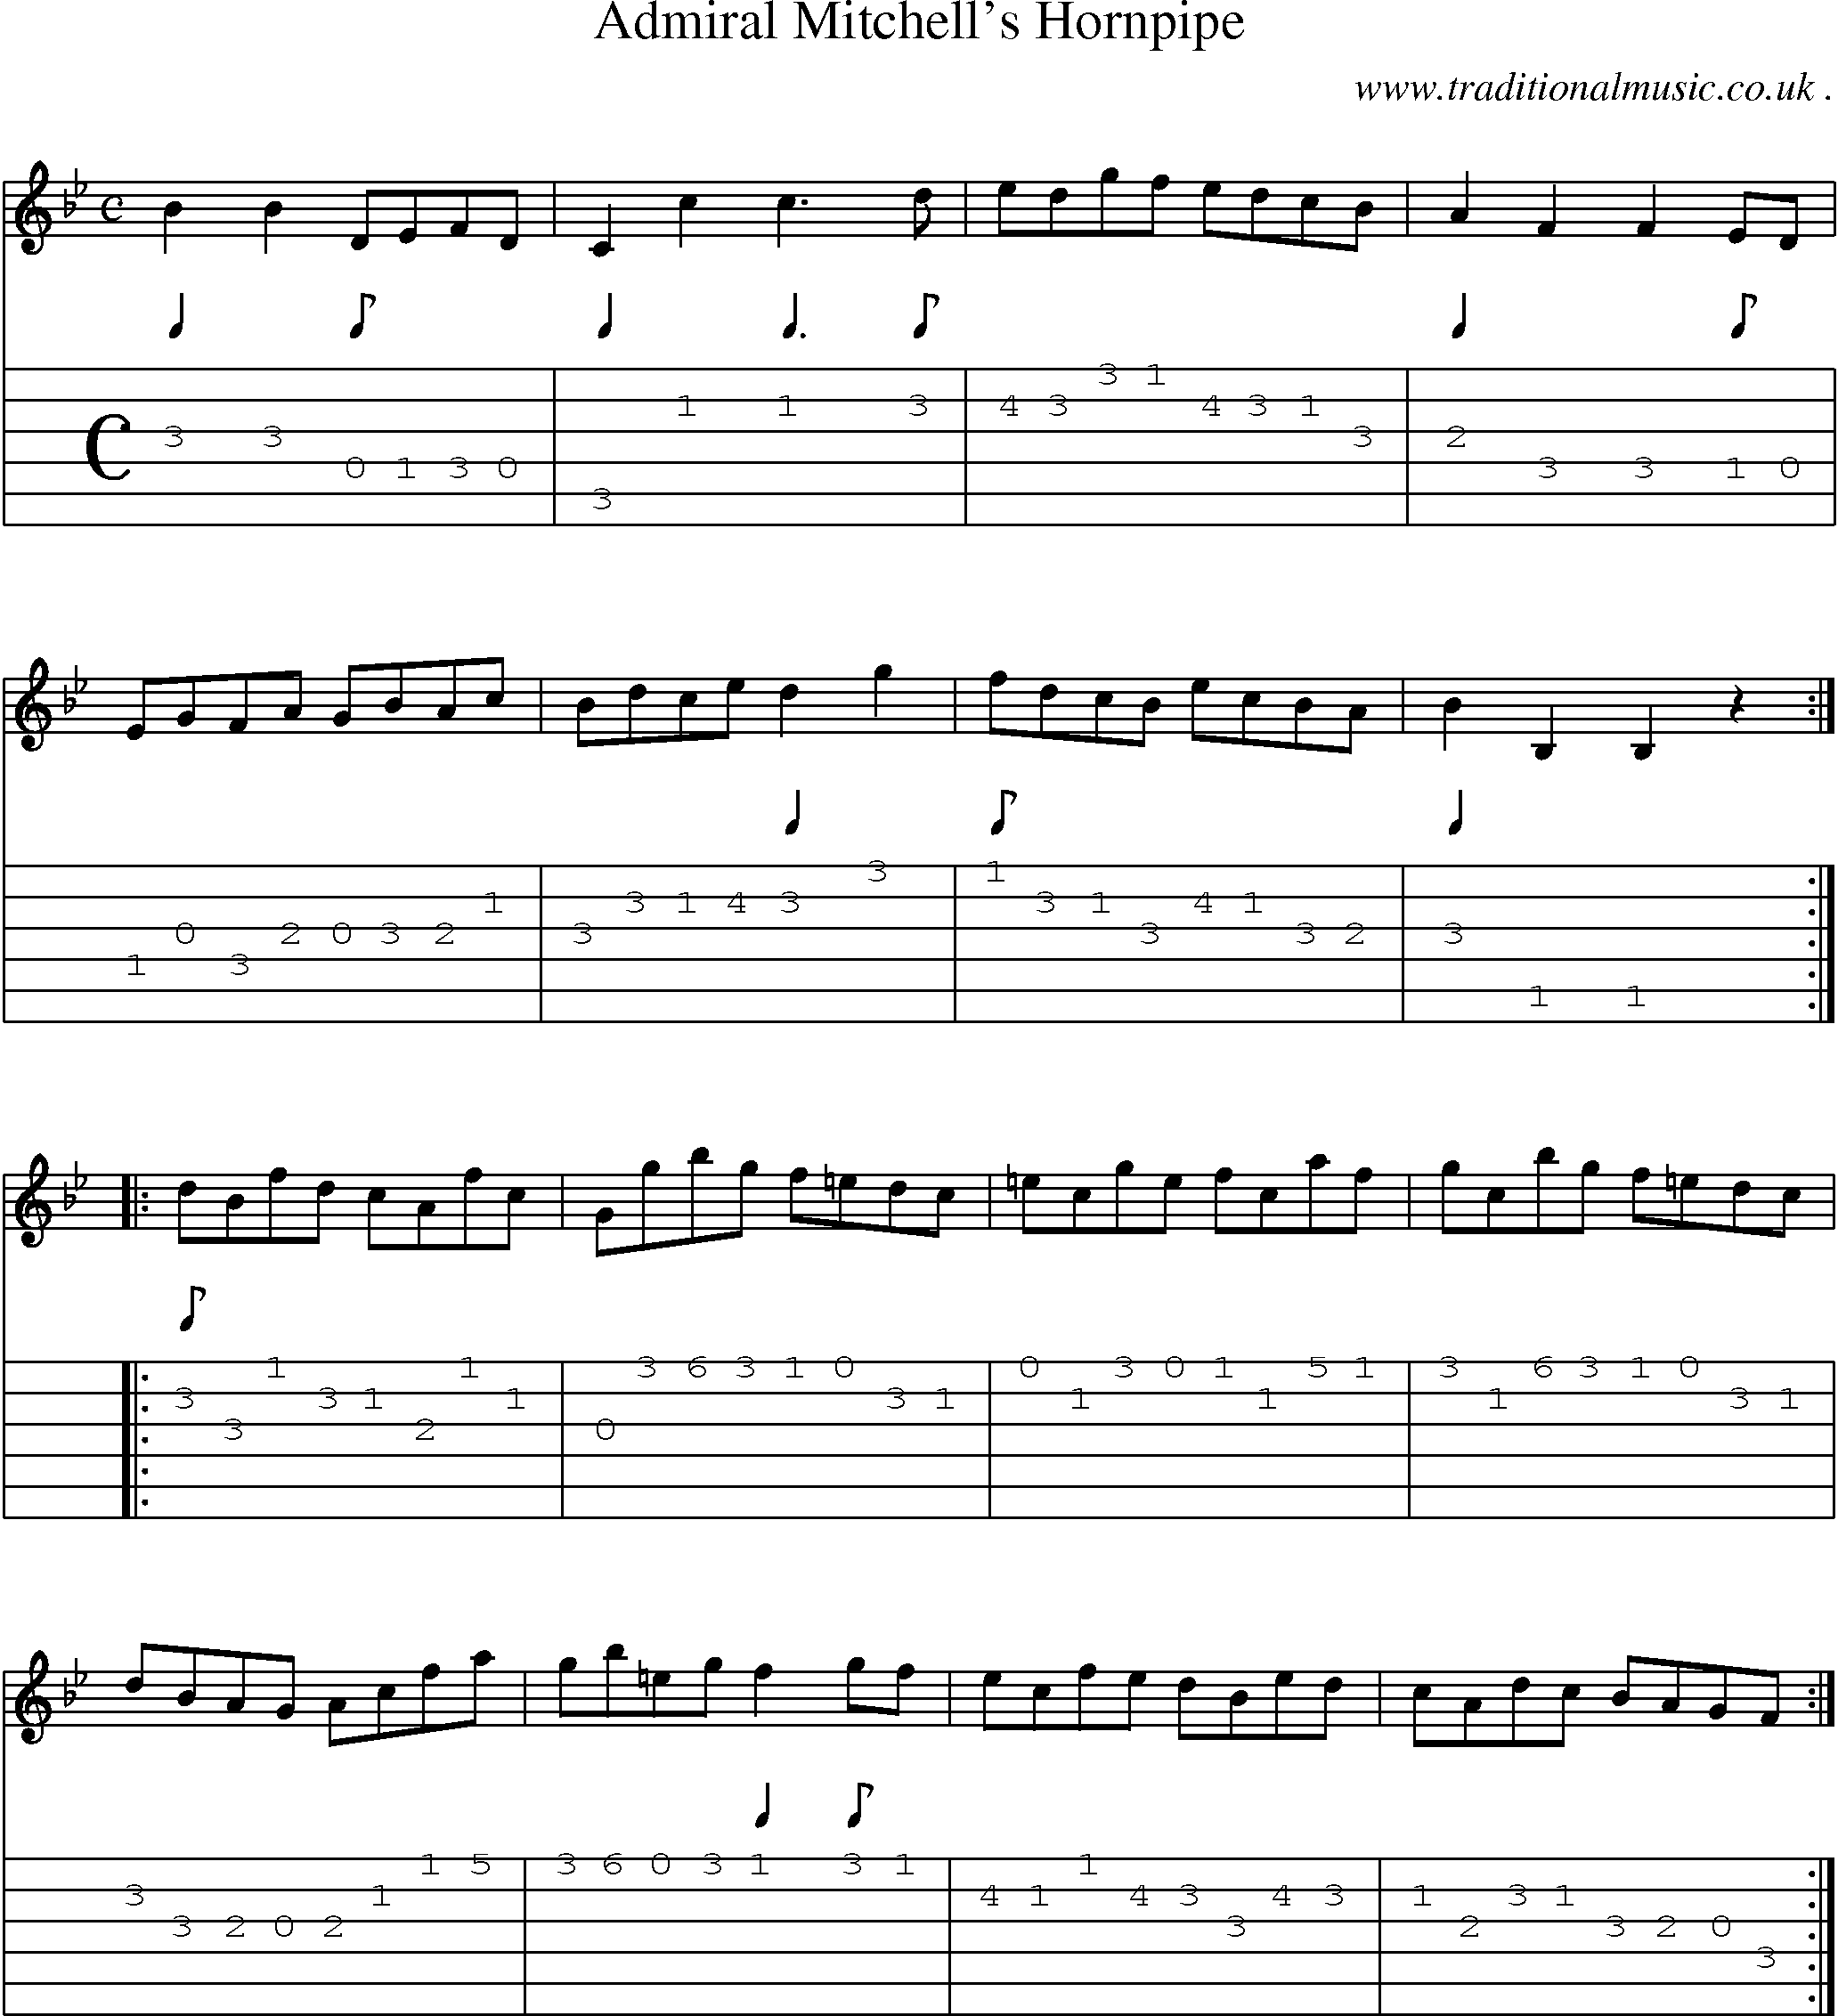 Sheet-Music and Guitar Tabs for Admiral Mitchells Hornpipe